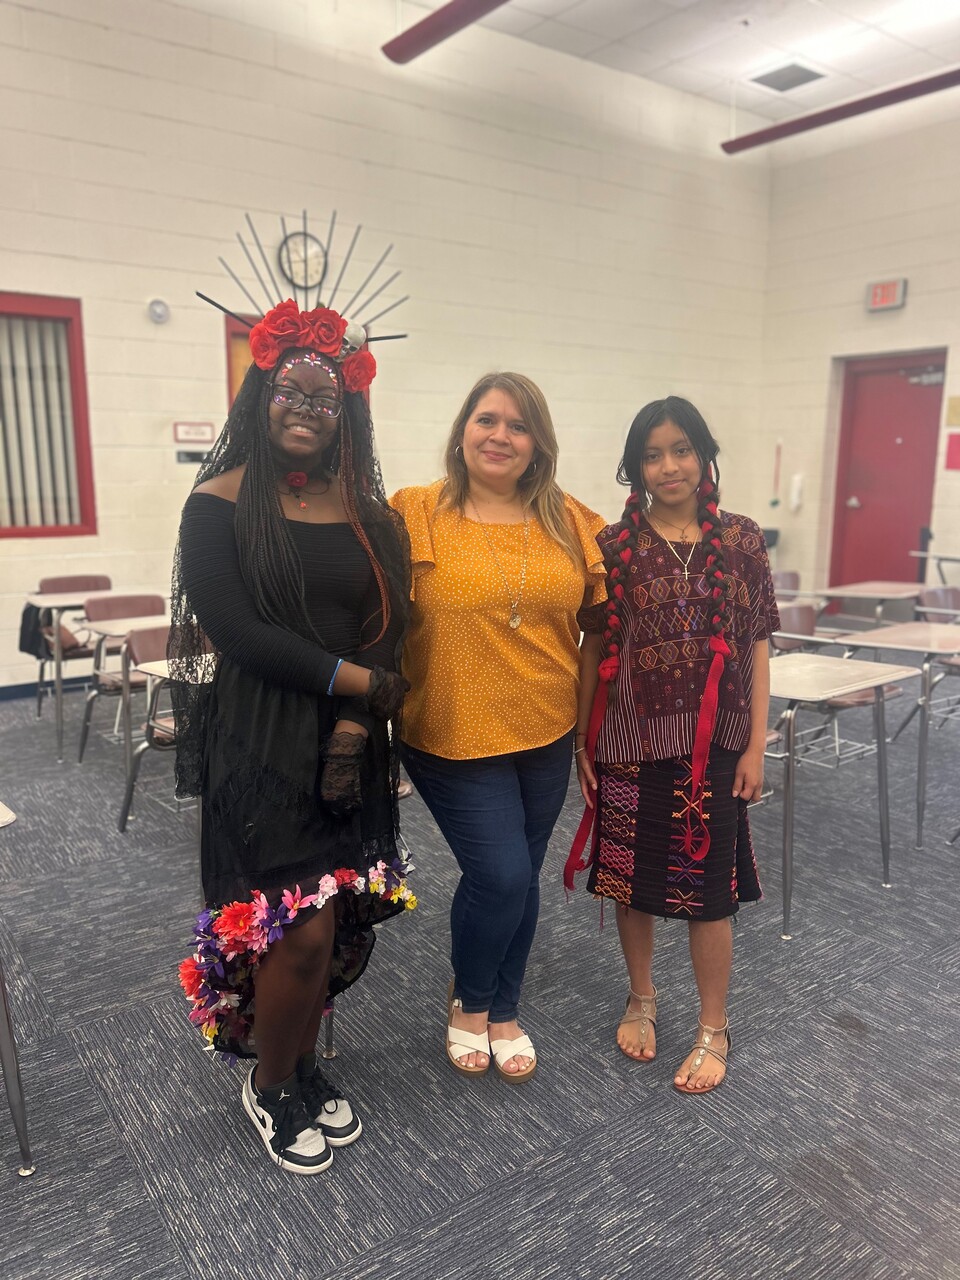 A Campbell Middle School student was awarded Best of Show for Traditional Dress. She is La Catrina on the left, Ja'Nyla Henry. Yalili Diaz-Sales was awarded 2nd place for her presentation on her Guatemalan Traditional Dress. Ms. Karelys Nunuz is their teacher, center.